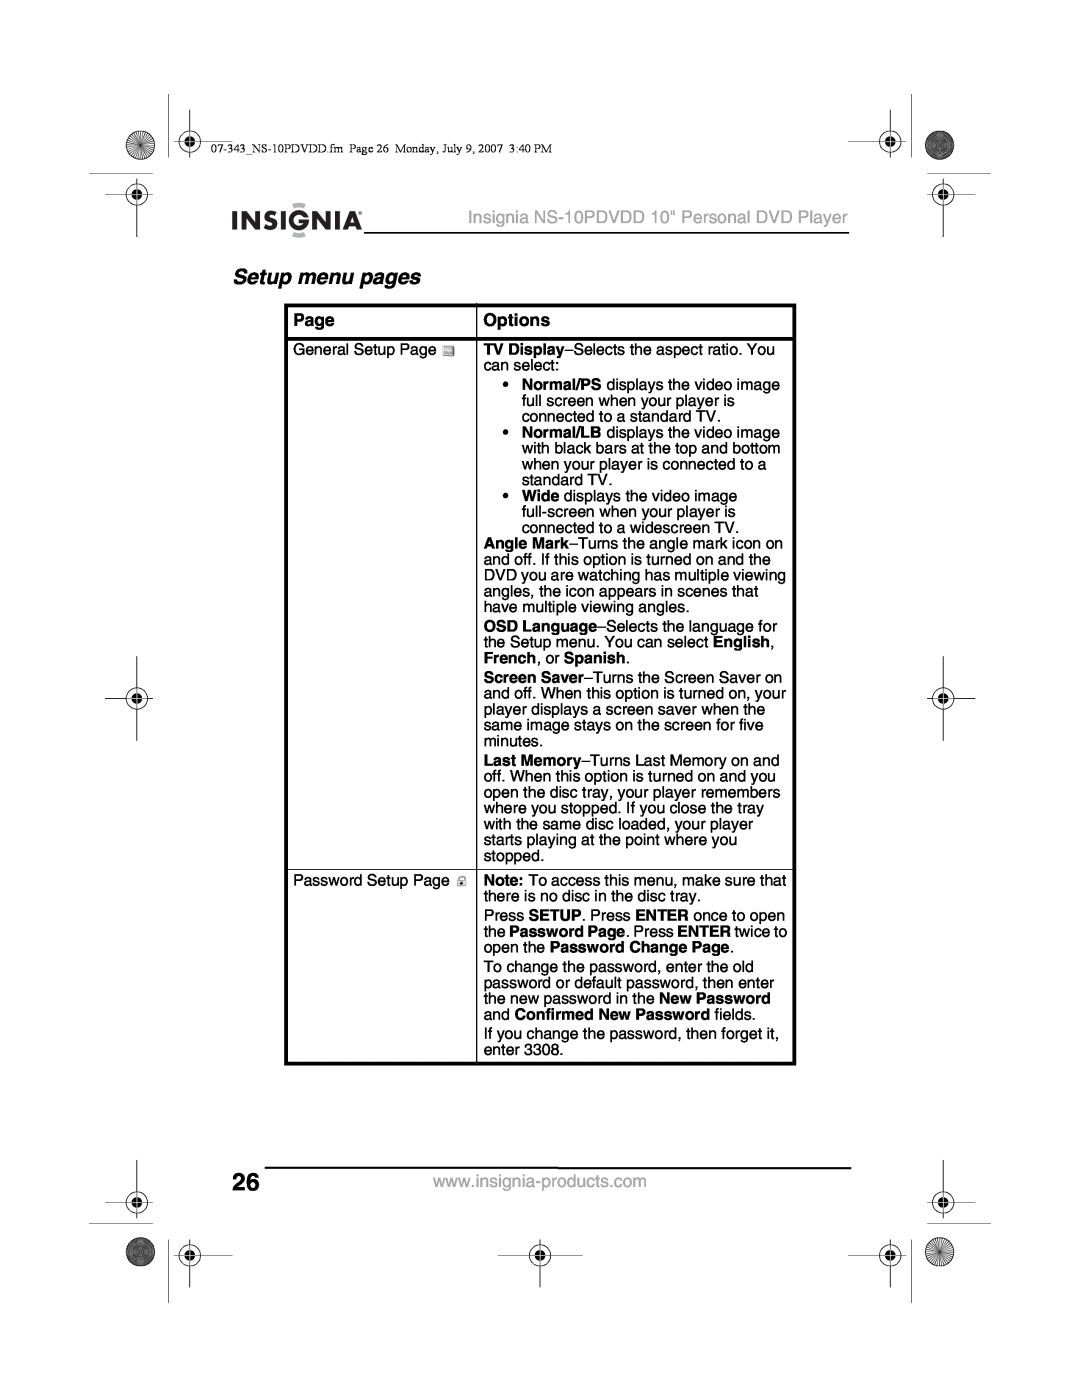 Insignia manual Setup menu pages, Page, Options, Insignia NS-10PDVDD 10 Personal DVD Player 